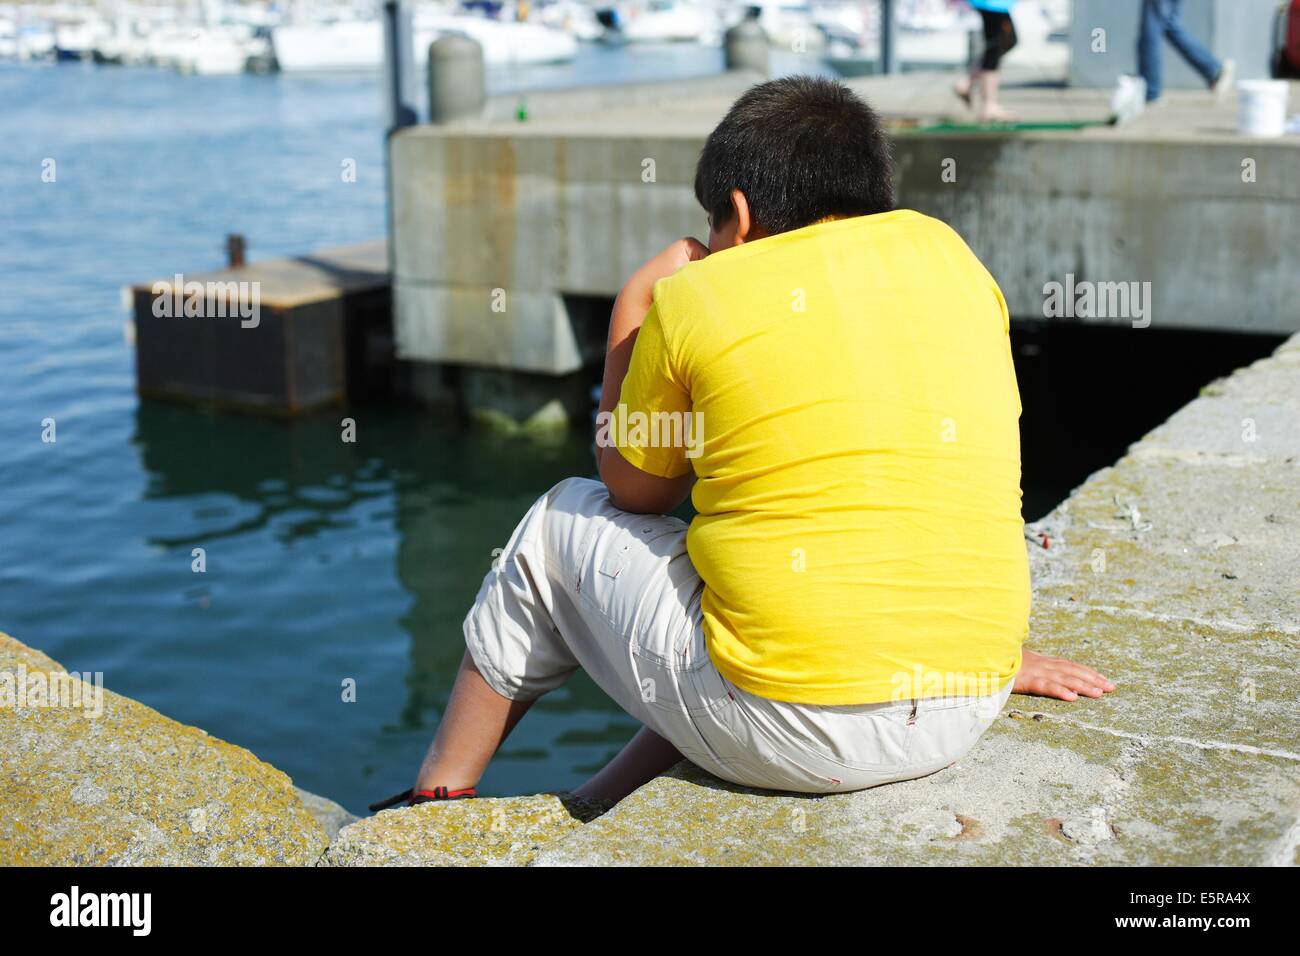 Obese 10 year old boy . Stock Photo